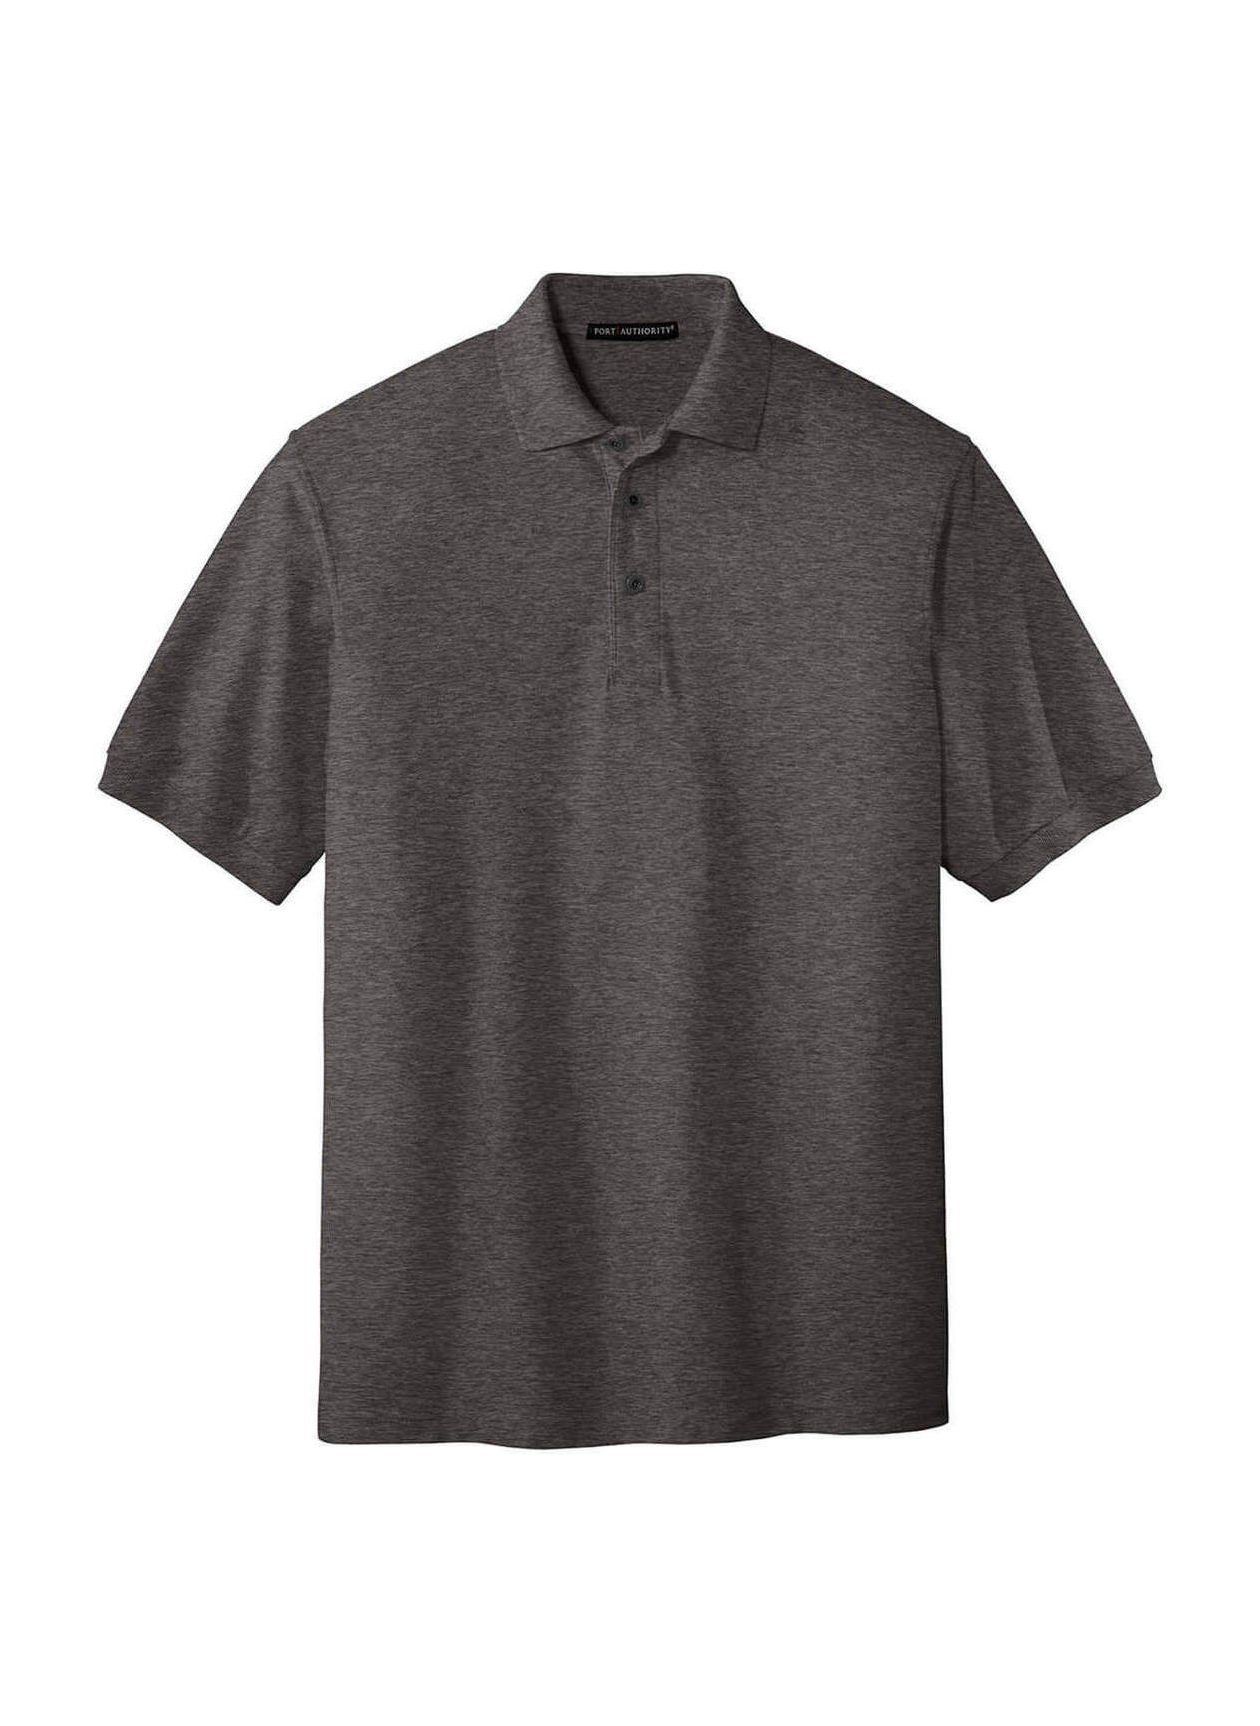 Port Authority Men's Charcoal Heather Grey Silk Touch Polo